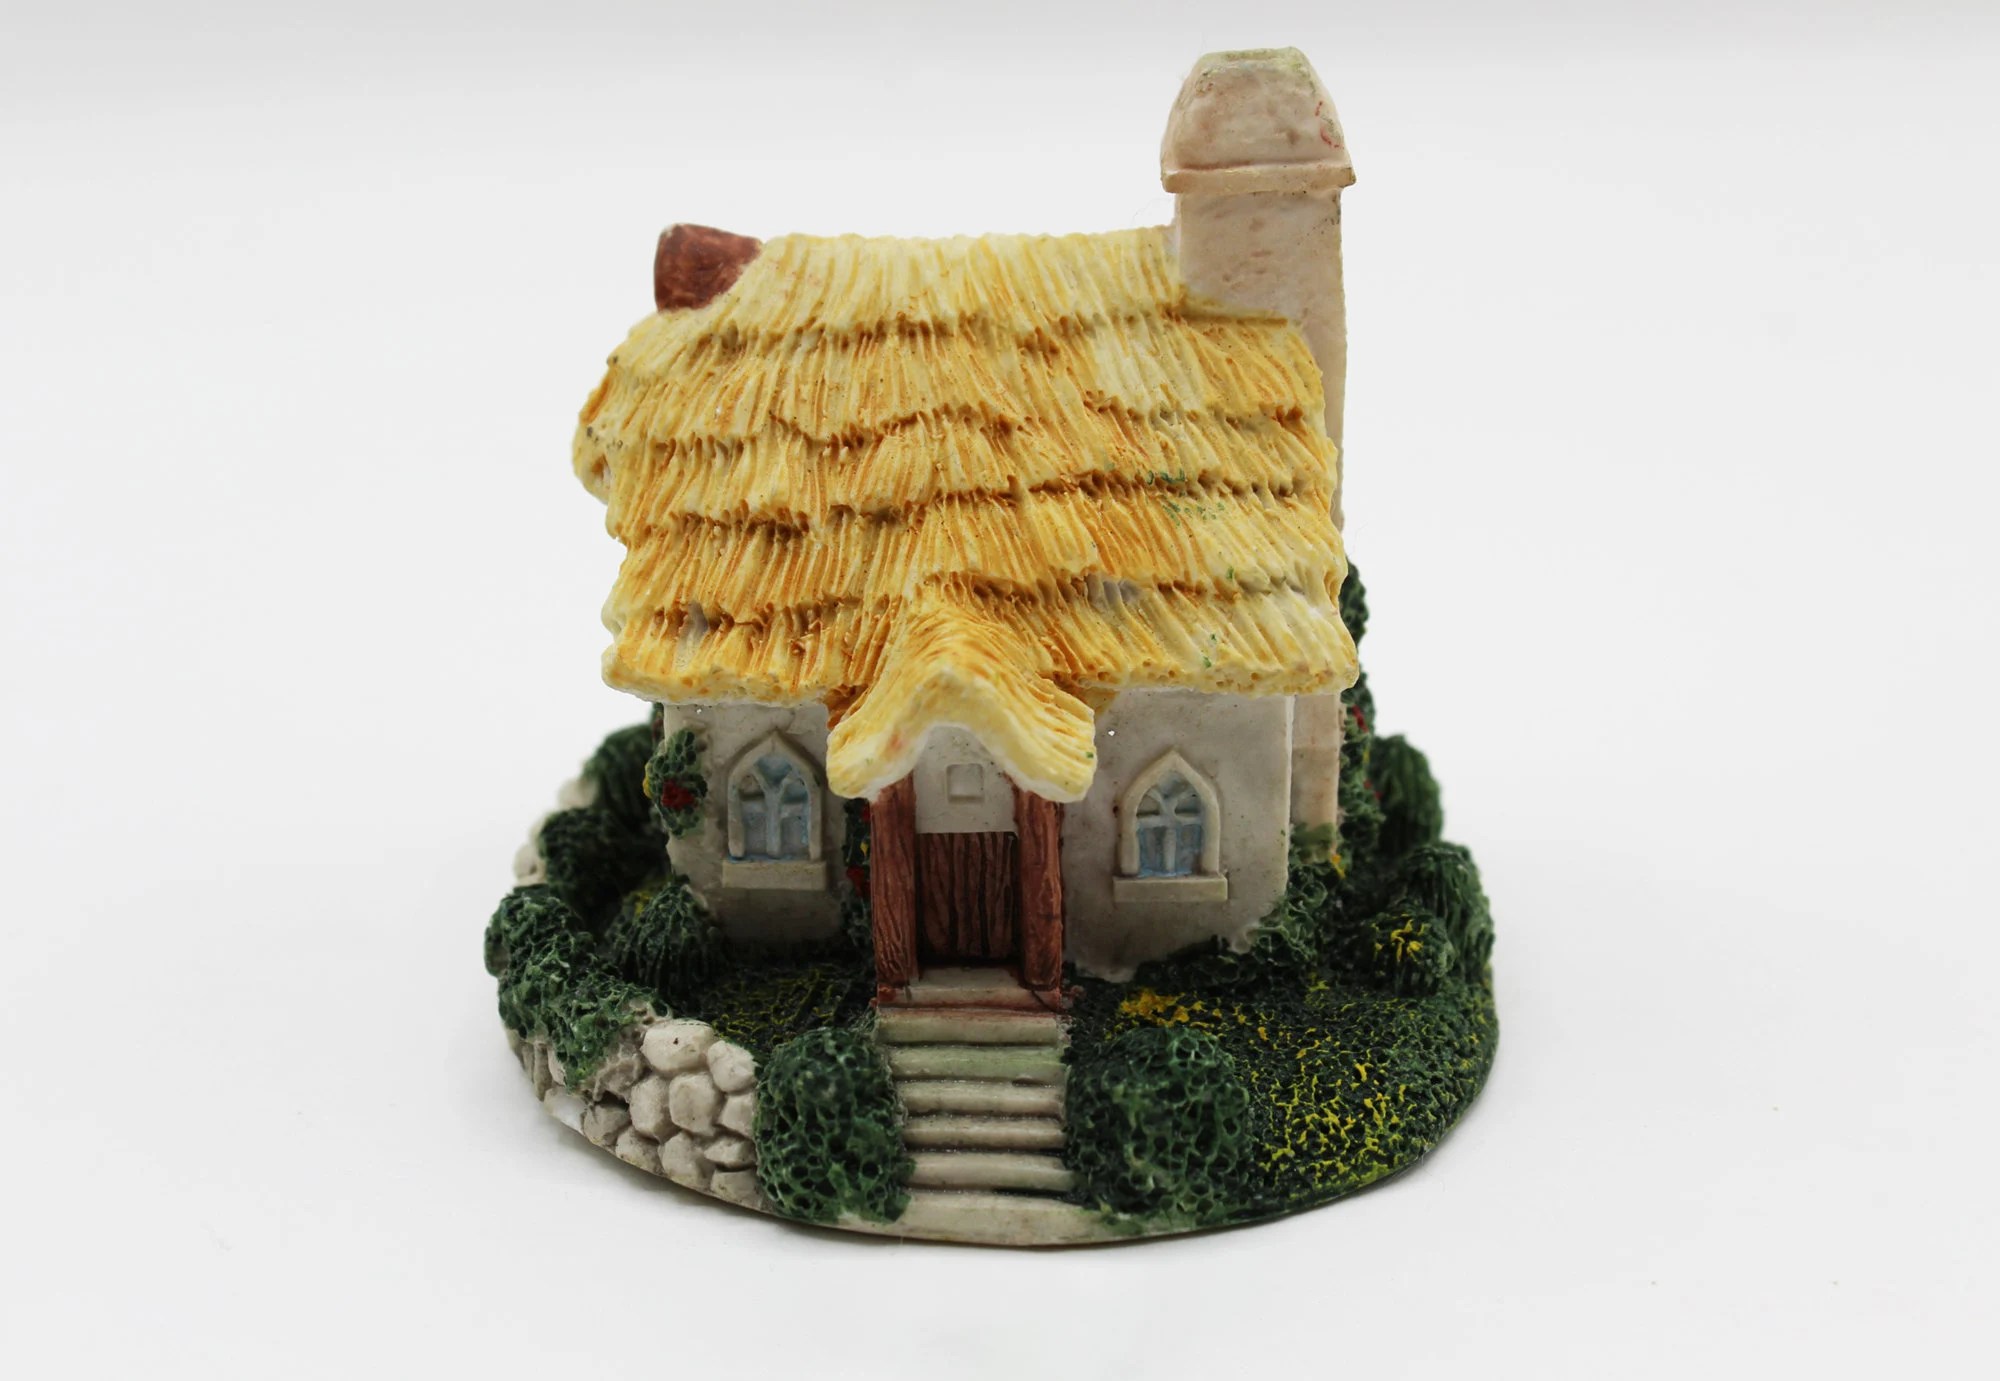 Cornwall Collector's Society "Miller's Cottage" Vintage Collectible Porcelain Ceramic House Miniature Figurine